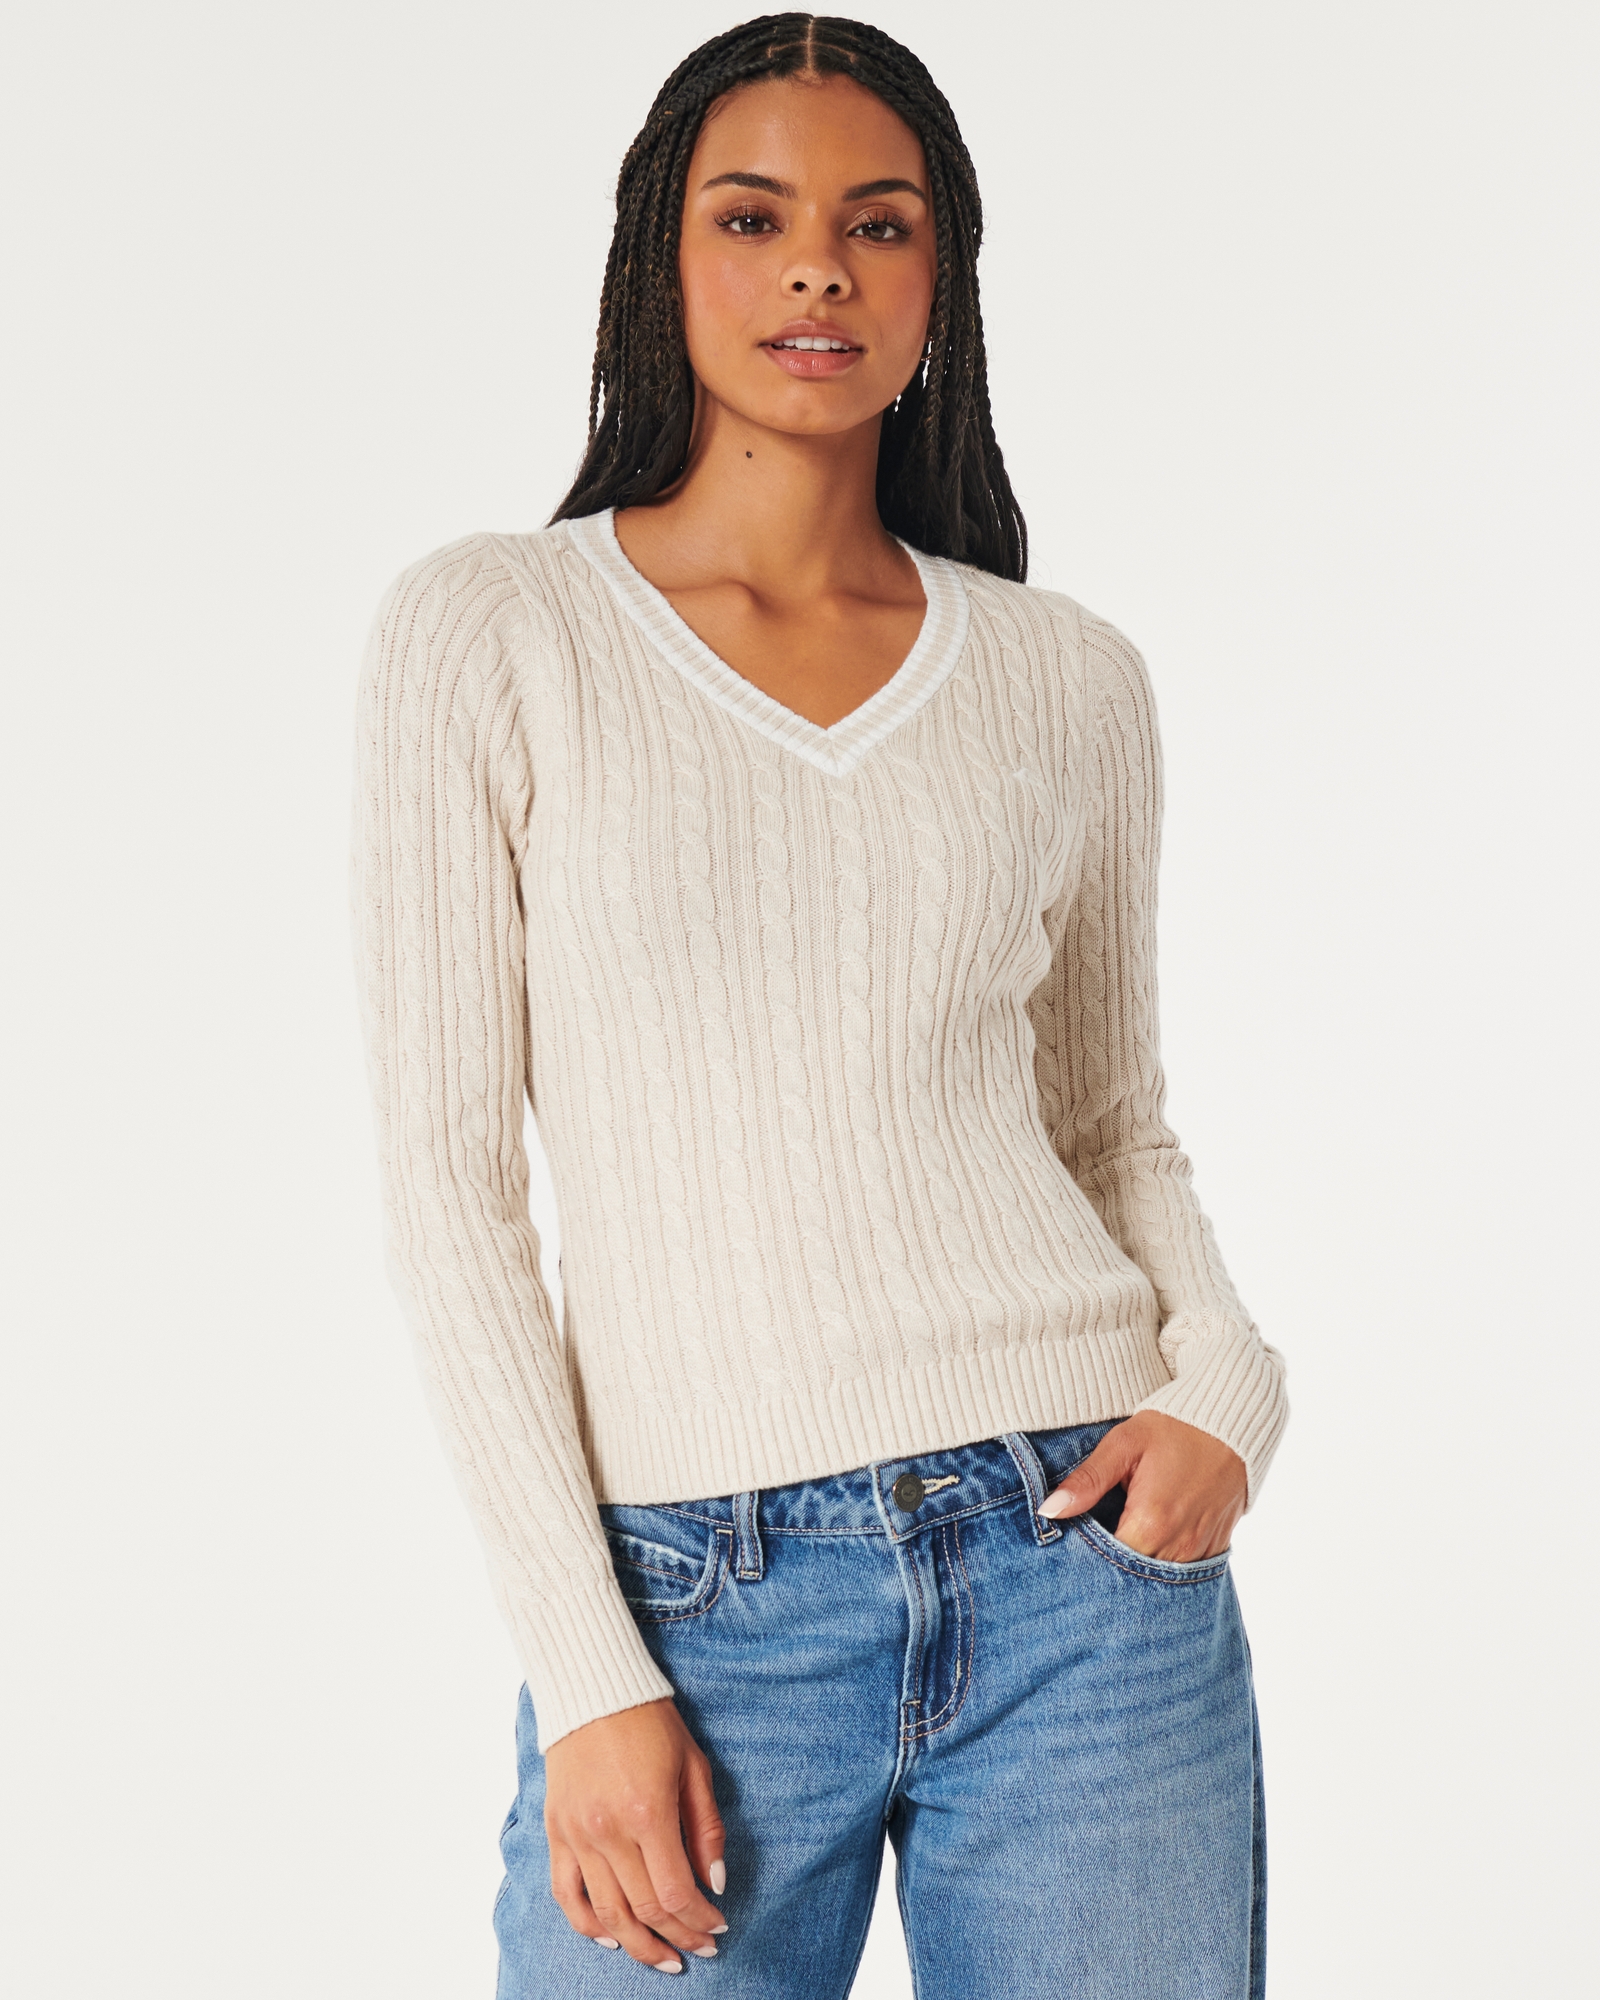 https://img.hollisterco.com/is/image/anf/KIC_350-3210-0014-145_model1.jpg?policy=product-extra-large